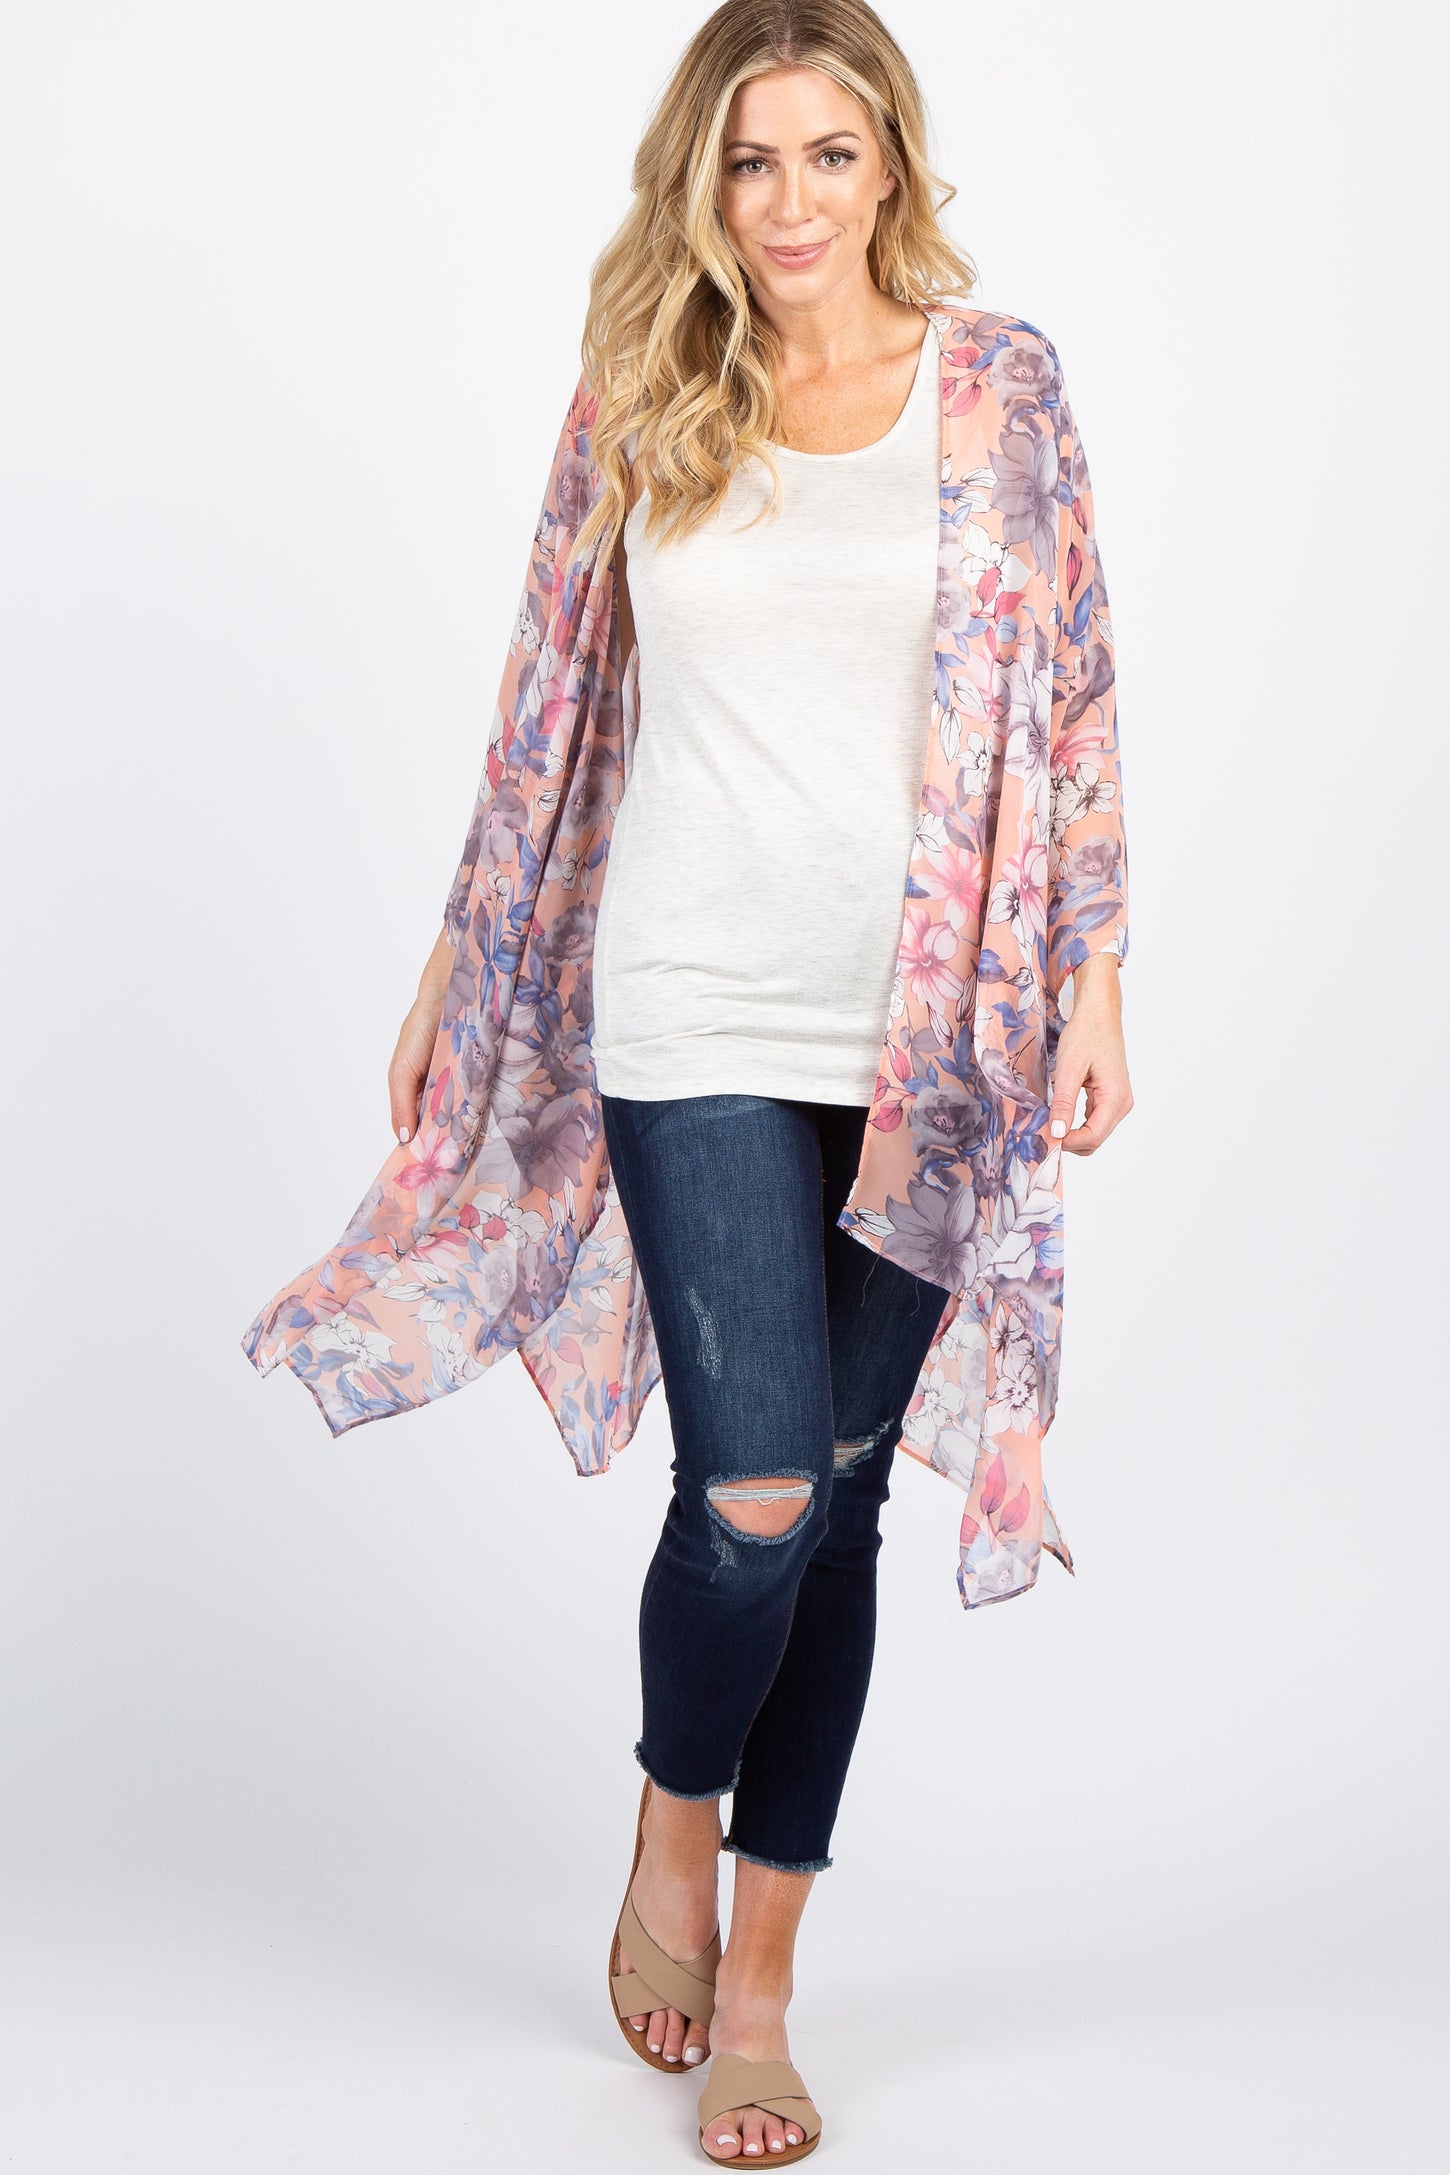 Peach Floral Chiffon Oversized Maternity Cover Up